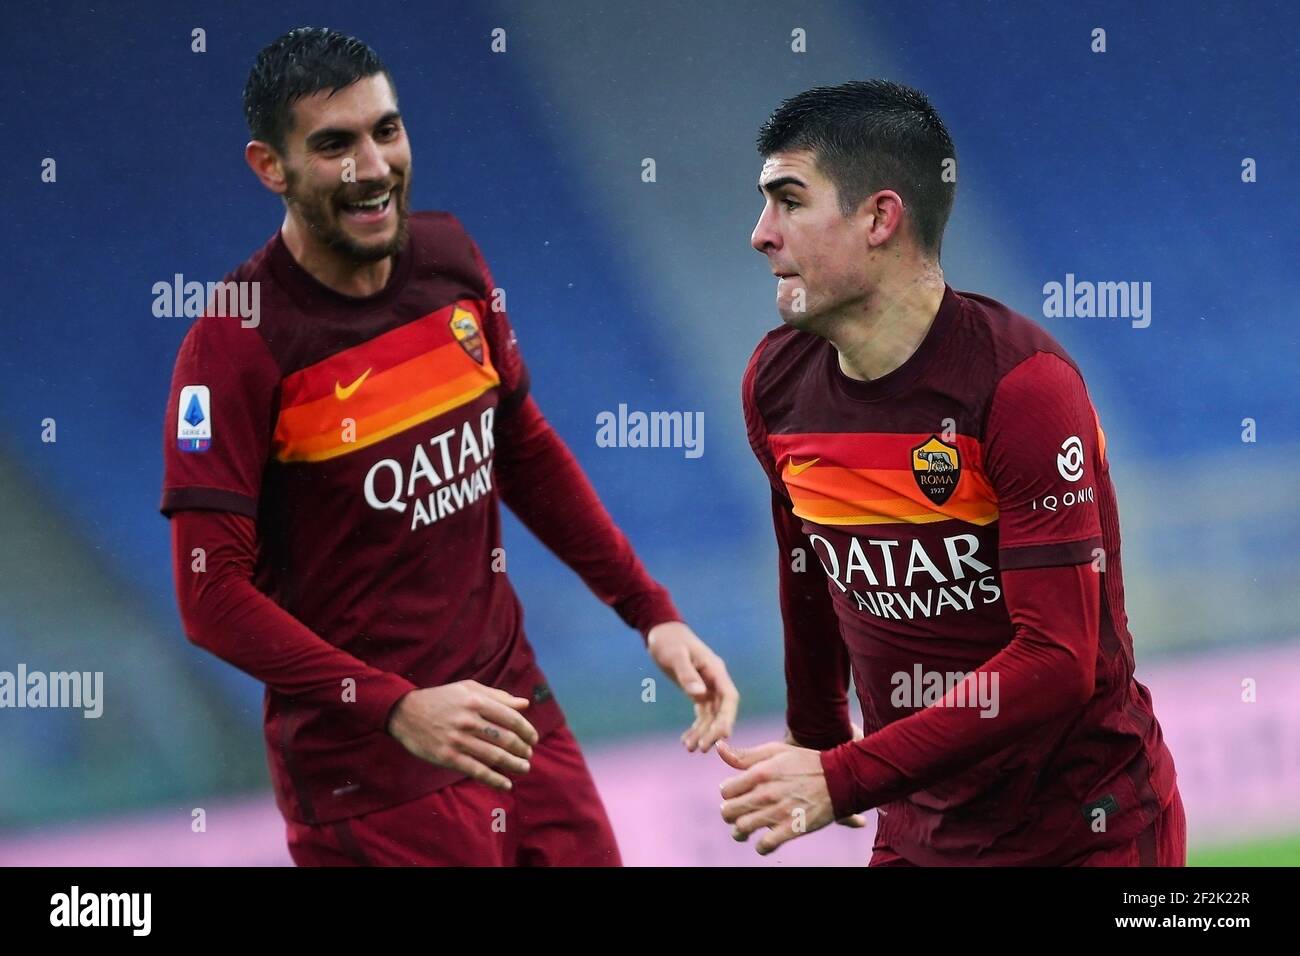 Gianluca Mancini Of Roma R Celebrates With Lorenzo Pelegrini After Scoring 2 2 Goal During The Italian Championship Serie A Football Match Between As Roma And Fc Internazionale On January 10 21 At